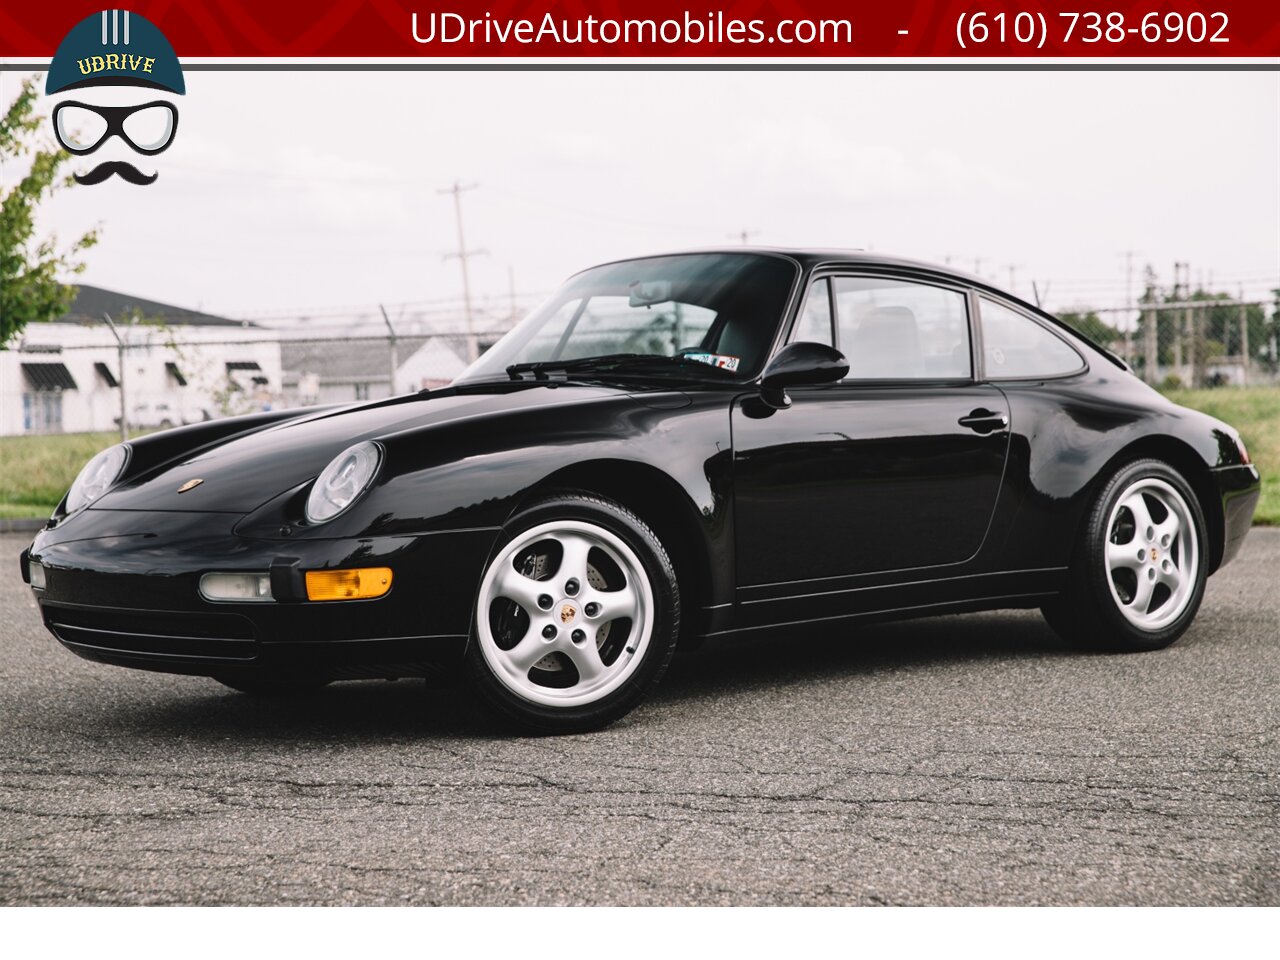 1995 Porsche 911 993 Carrera 6 Speed 16k Miles Service History  Black over Black Spectacular Stock Example 1 Owner Clean Carfax - Photo 1 - West Chester, PA 19382